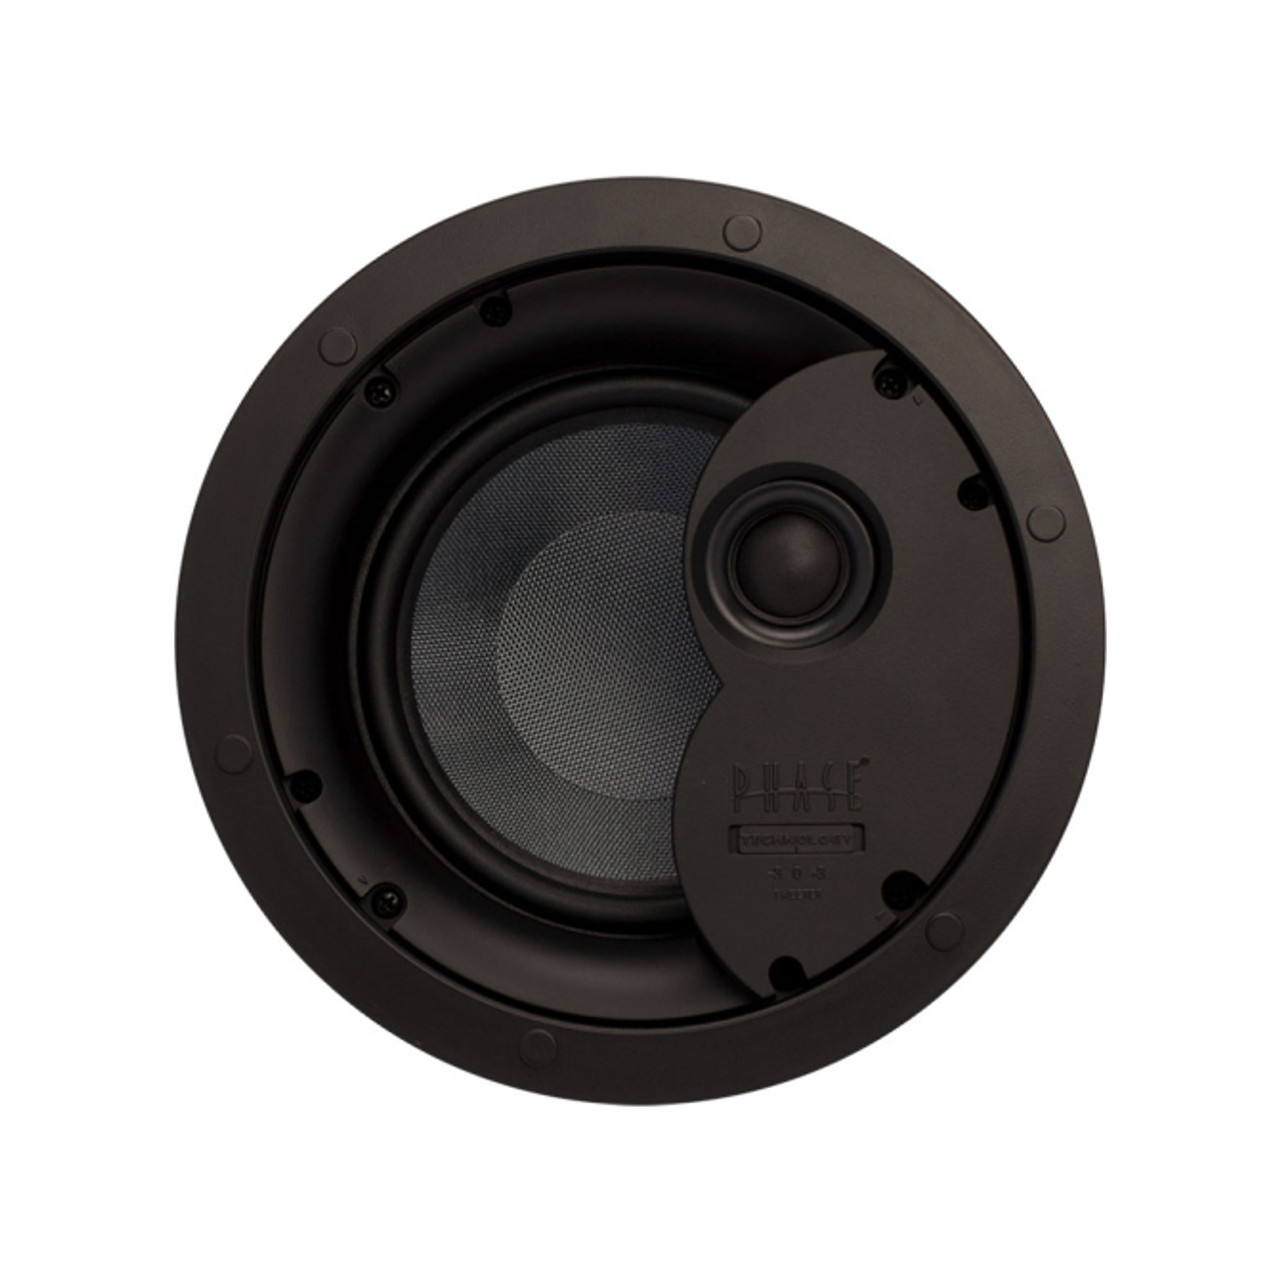  Phase Technology CI6.1X MP 6.5" 2-way Ceiling Speaker Master Pack (4 Units) (CI6.1X MP)